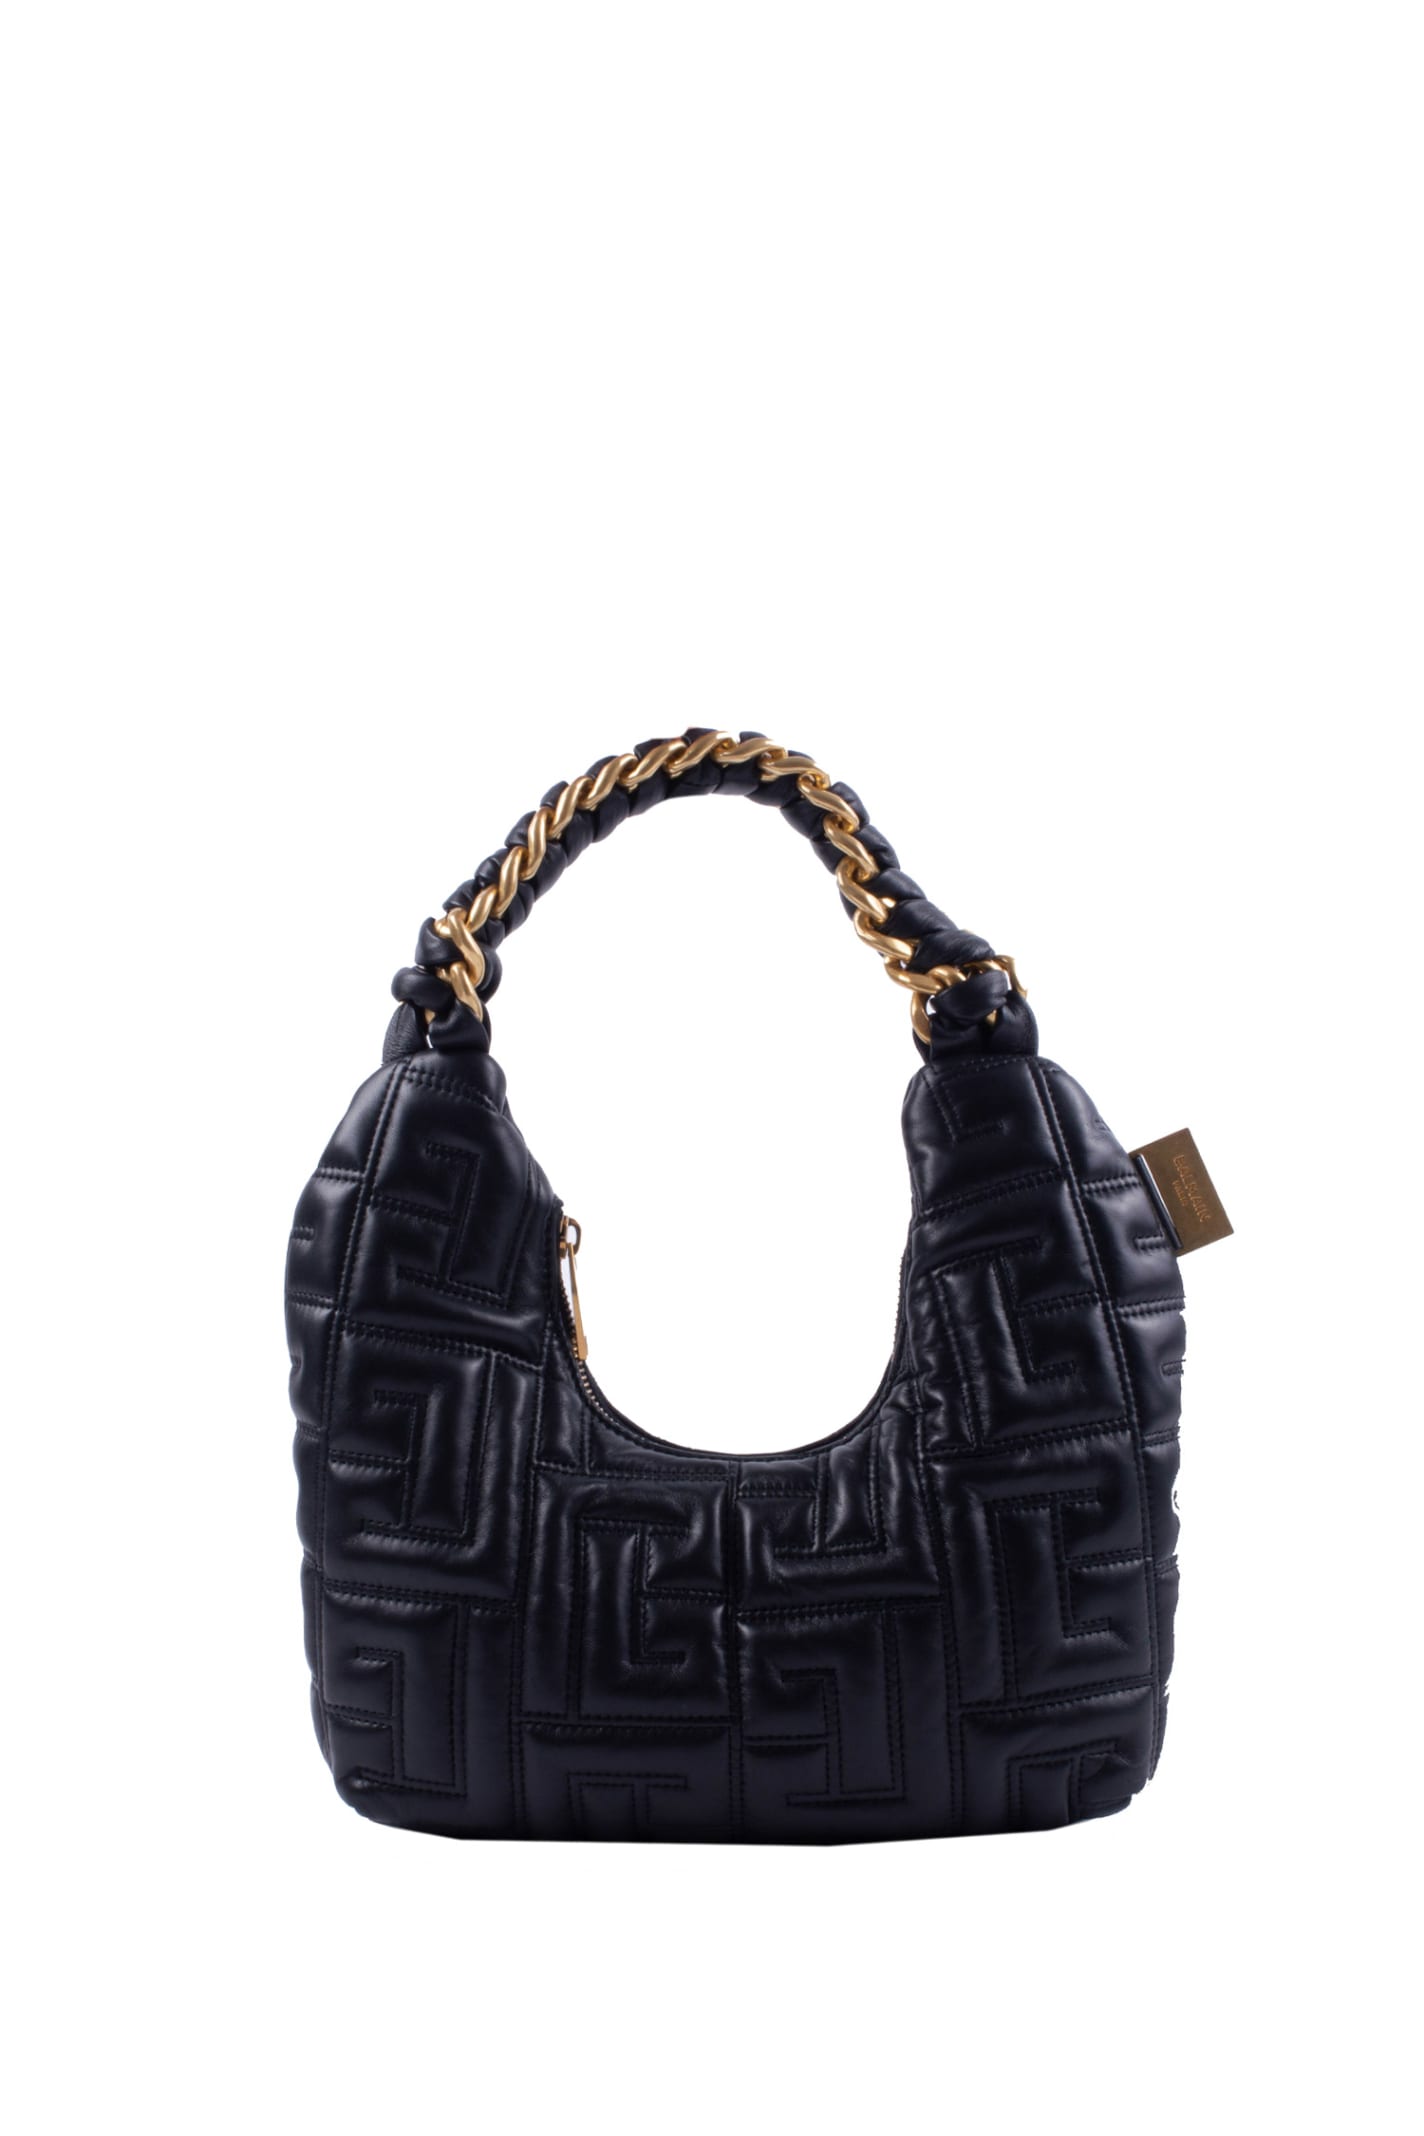 Balmain Black Quilted Leather Pillow Hobo Bag